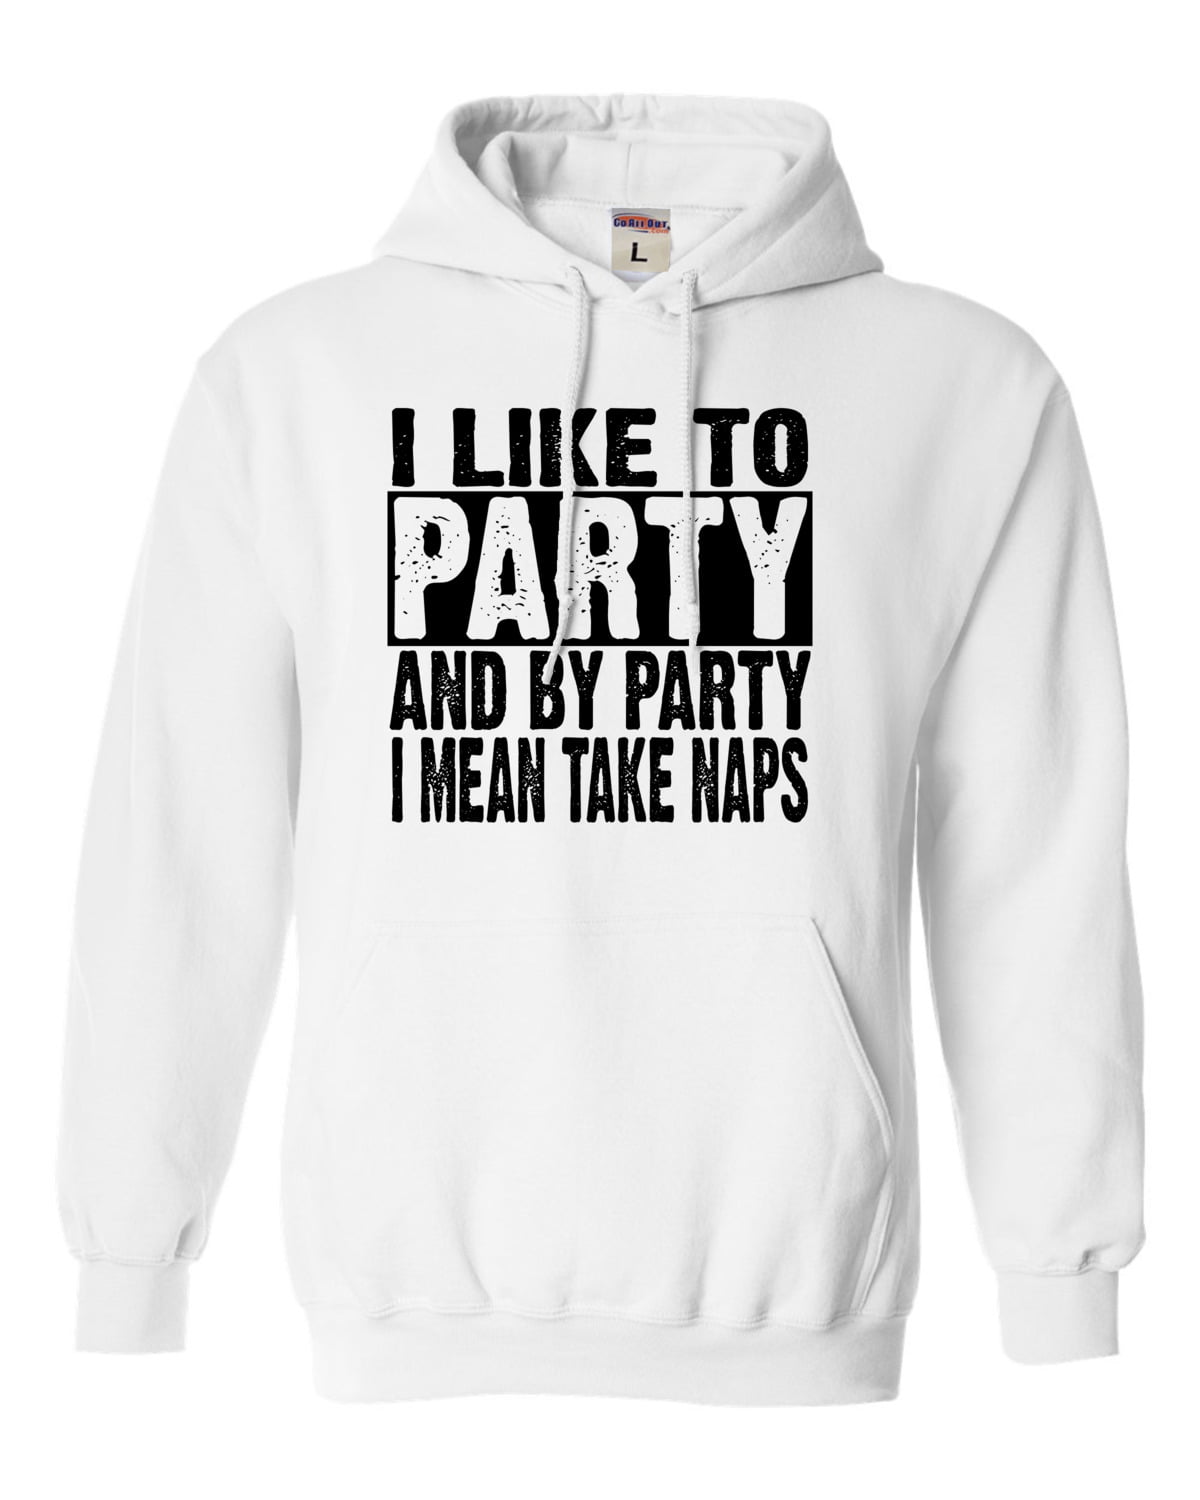 I Like to Party and by Party I Mean Take Naps Hoodie Sweatshirt Funny Hooded 